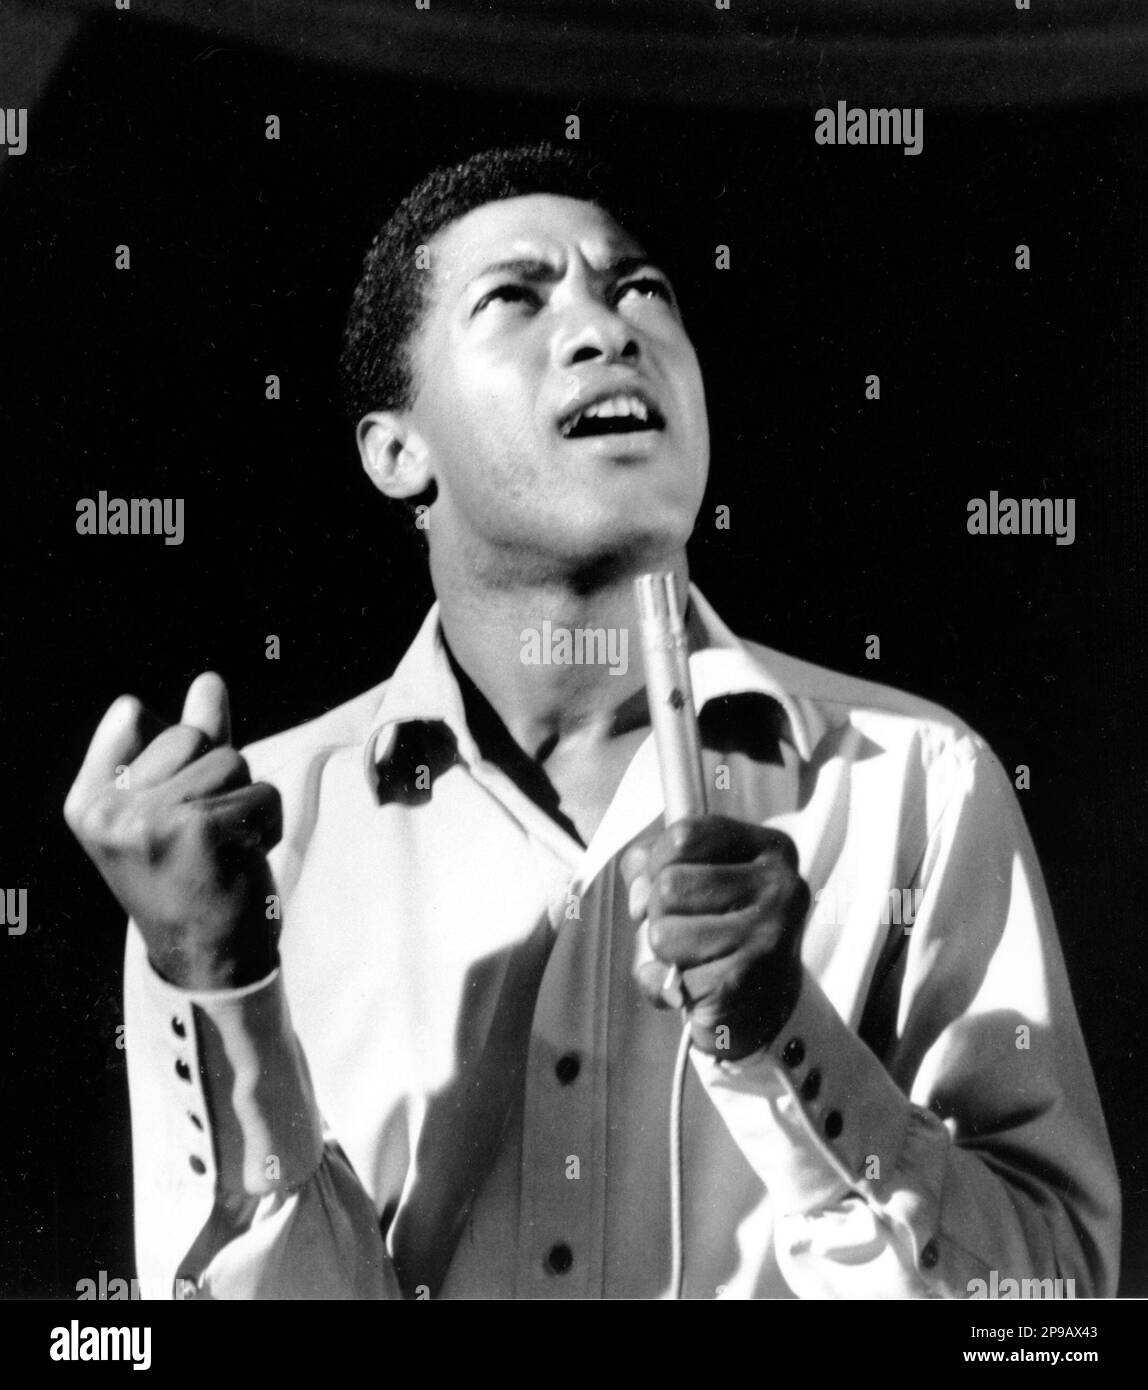 ** ARCHIV ** Sam Cooke singt bei einem Konzert in New York, auf einem undatierten Archivbild. Die Reihe "Sweet Soul Music" des Reissue-Labels Bear Family widmet scih dem Soul der Jahre 1961 bis 1965. (AP Photo) ** zu unserem KORR ** NUR S/W ** ** FILE ** Sam Cooke performs in concert at New York City's Copacabana Night Club in this undated photo. The famed nightclub, currently in its third reincarnation on West 34th Street in New York City, has been condemned by the city to make way for an extension of the No. 7 subway line to the Javits Center. The club will relocate once the owners secure a  Stock Photo